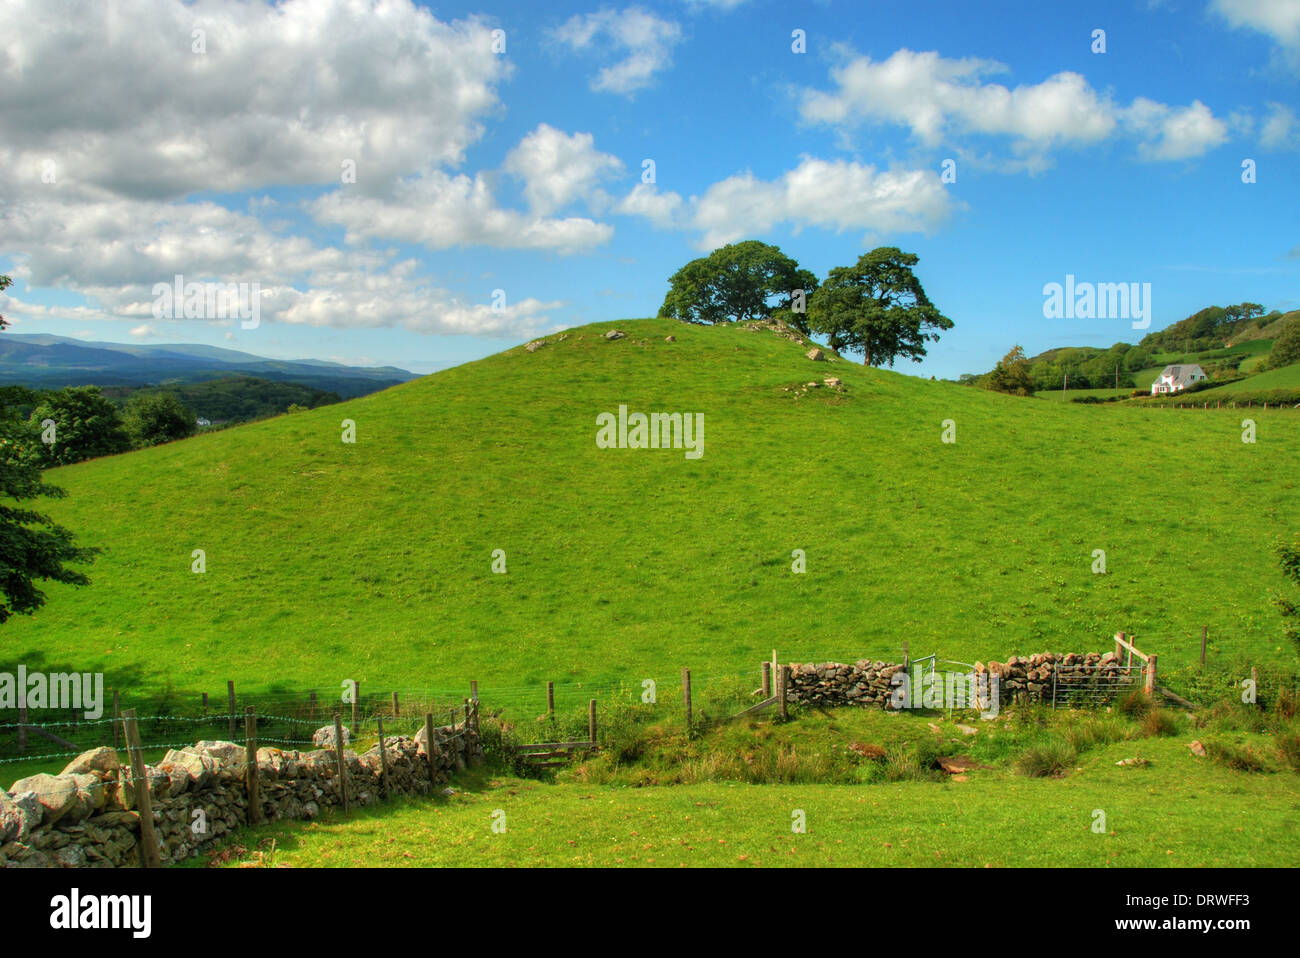 A hill in the North Wales countryside Stock Photo